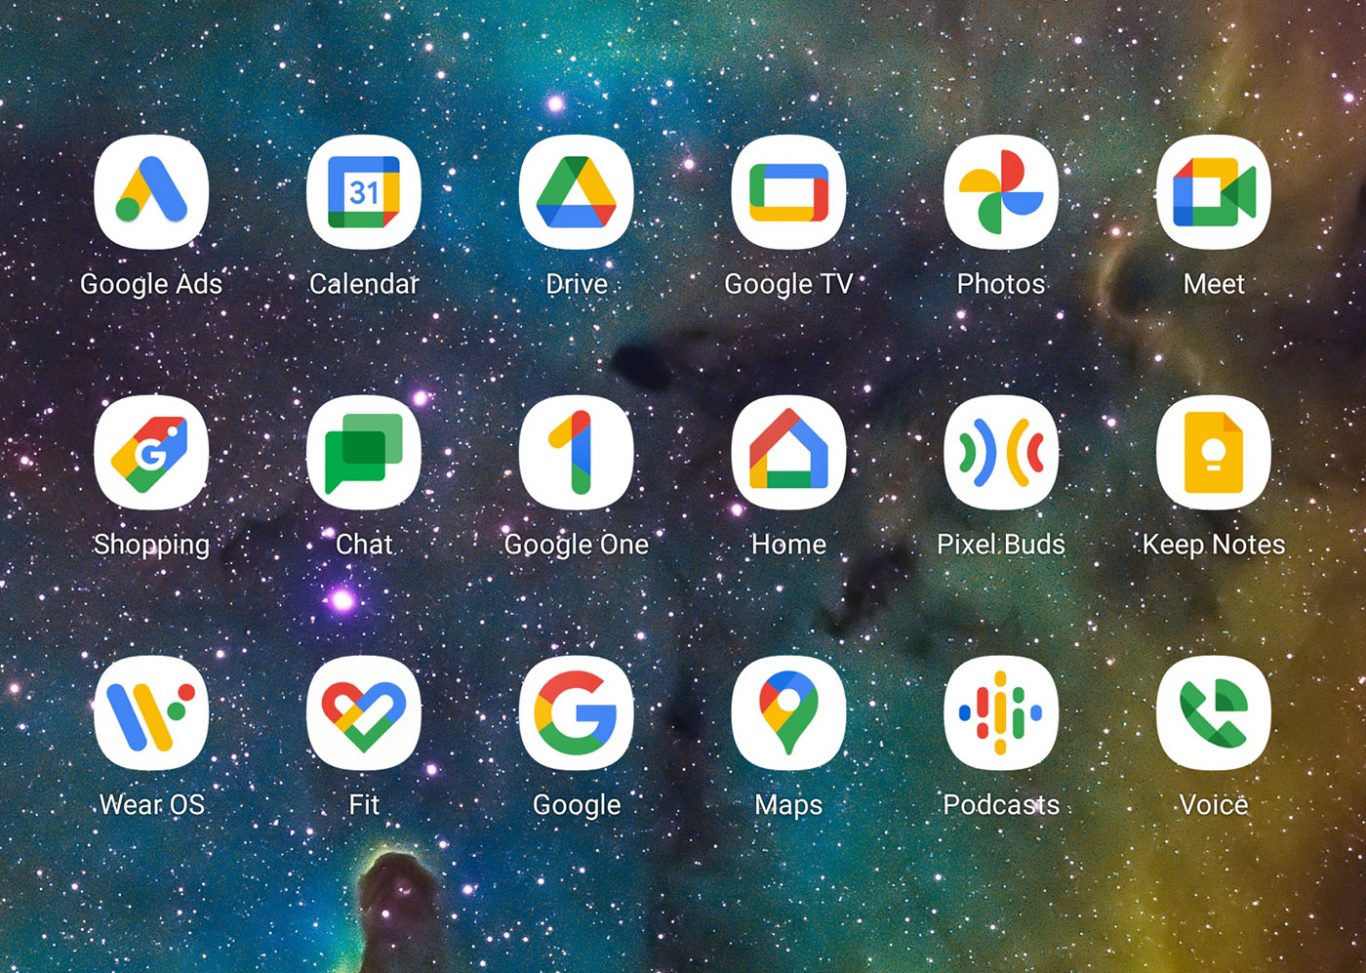 Do You Like Any of Google's New App Icons?